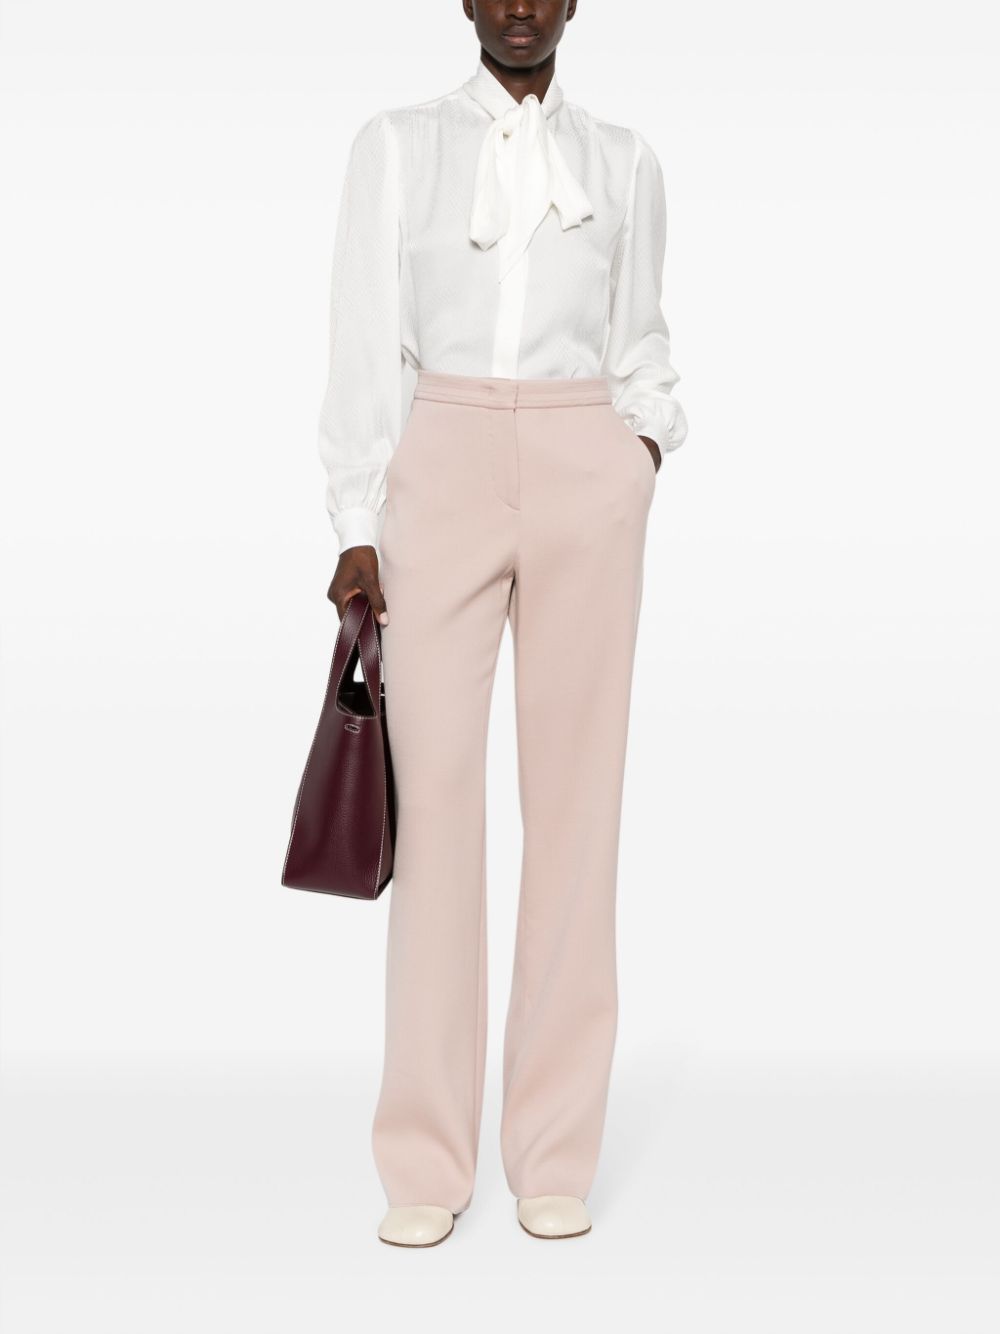 High-waisted straight tailored trousers